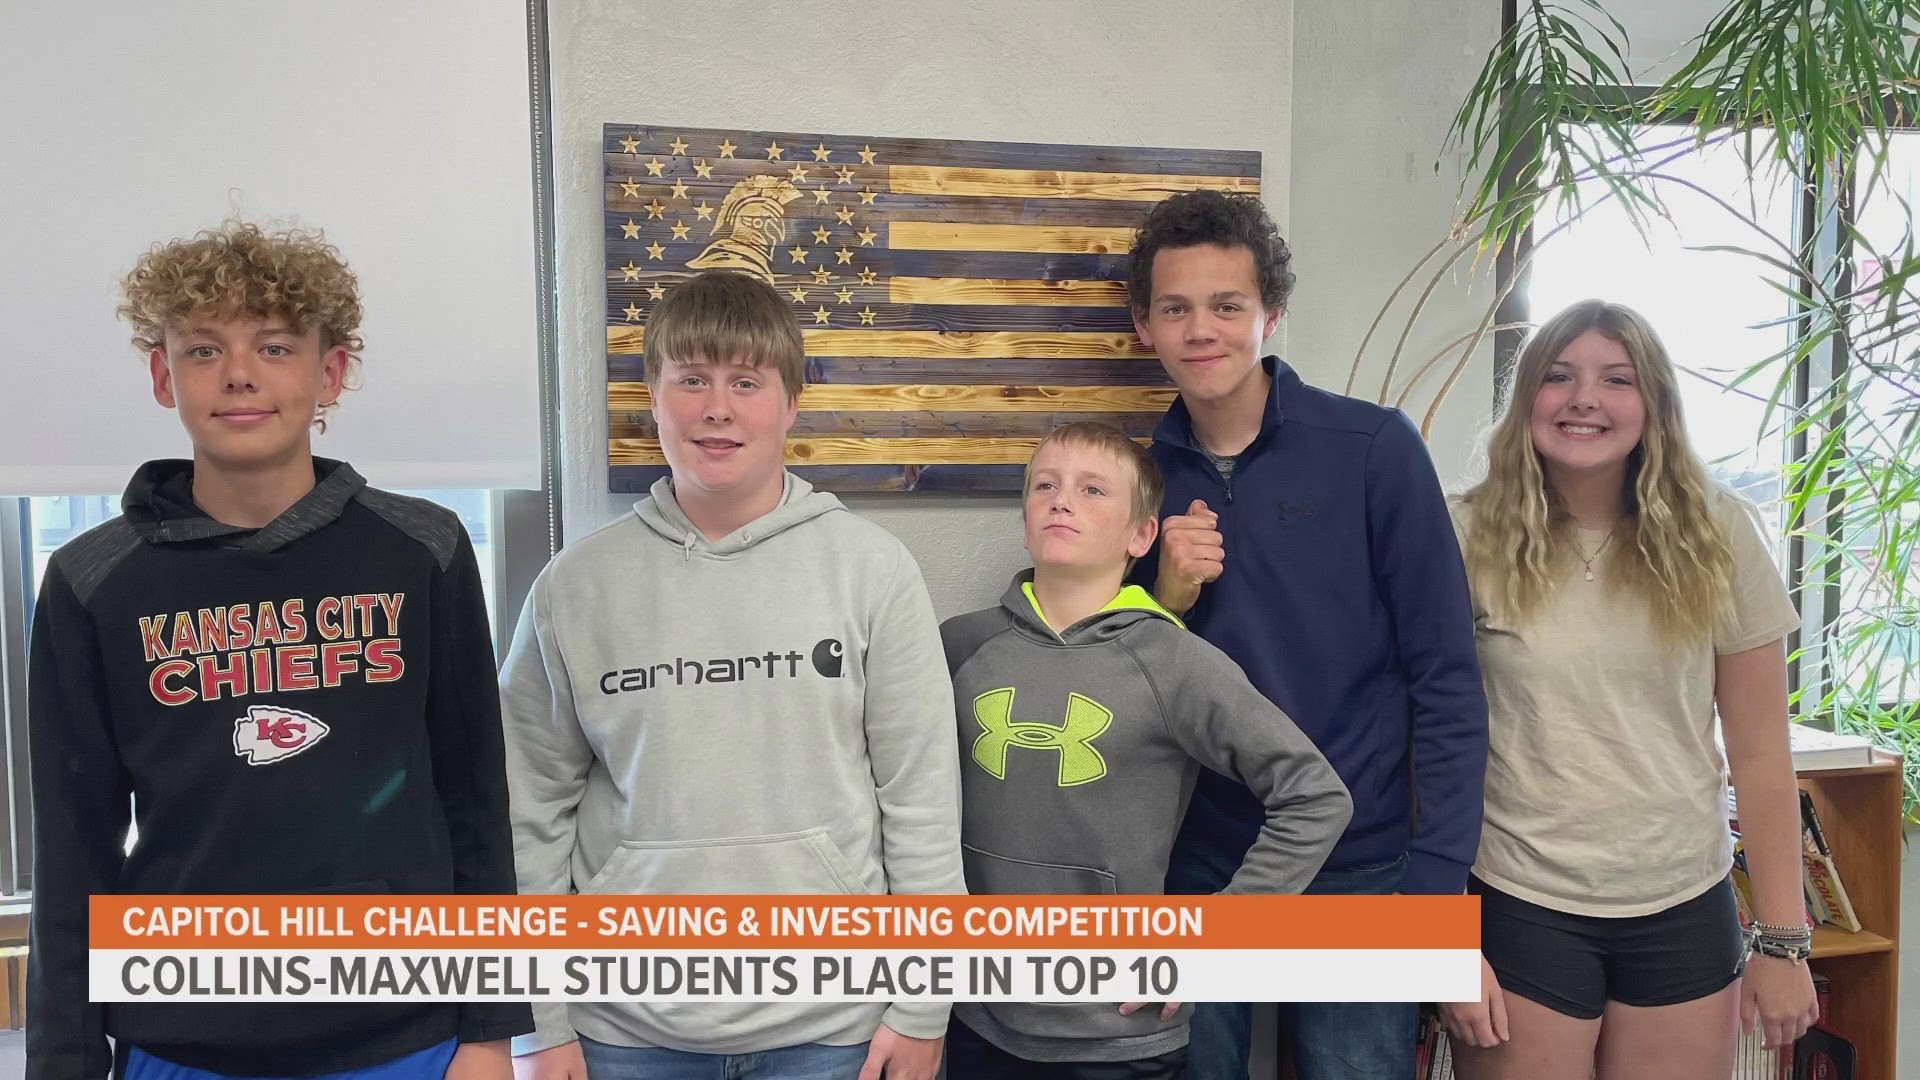 The team of five took part in the Capitol Hill Challenge, a yearly competition aimed at teaching students about money management and the stock market.